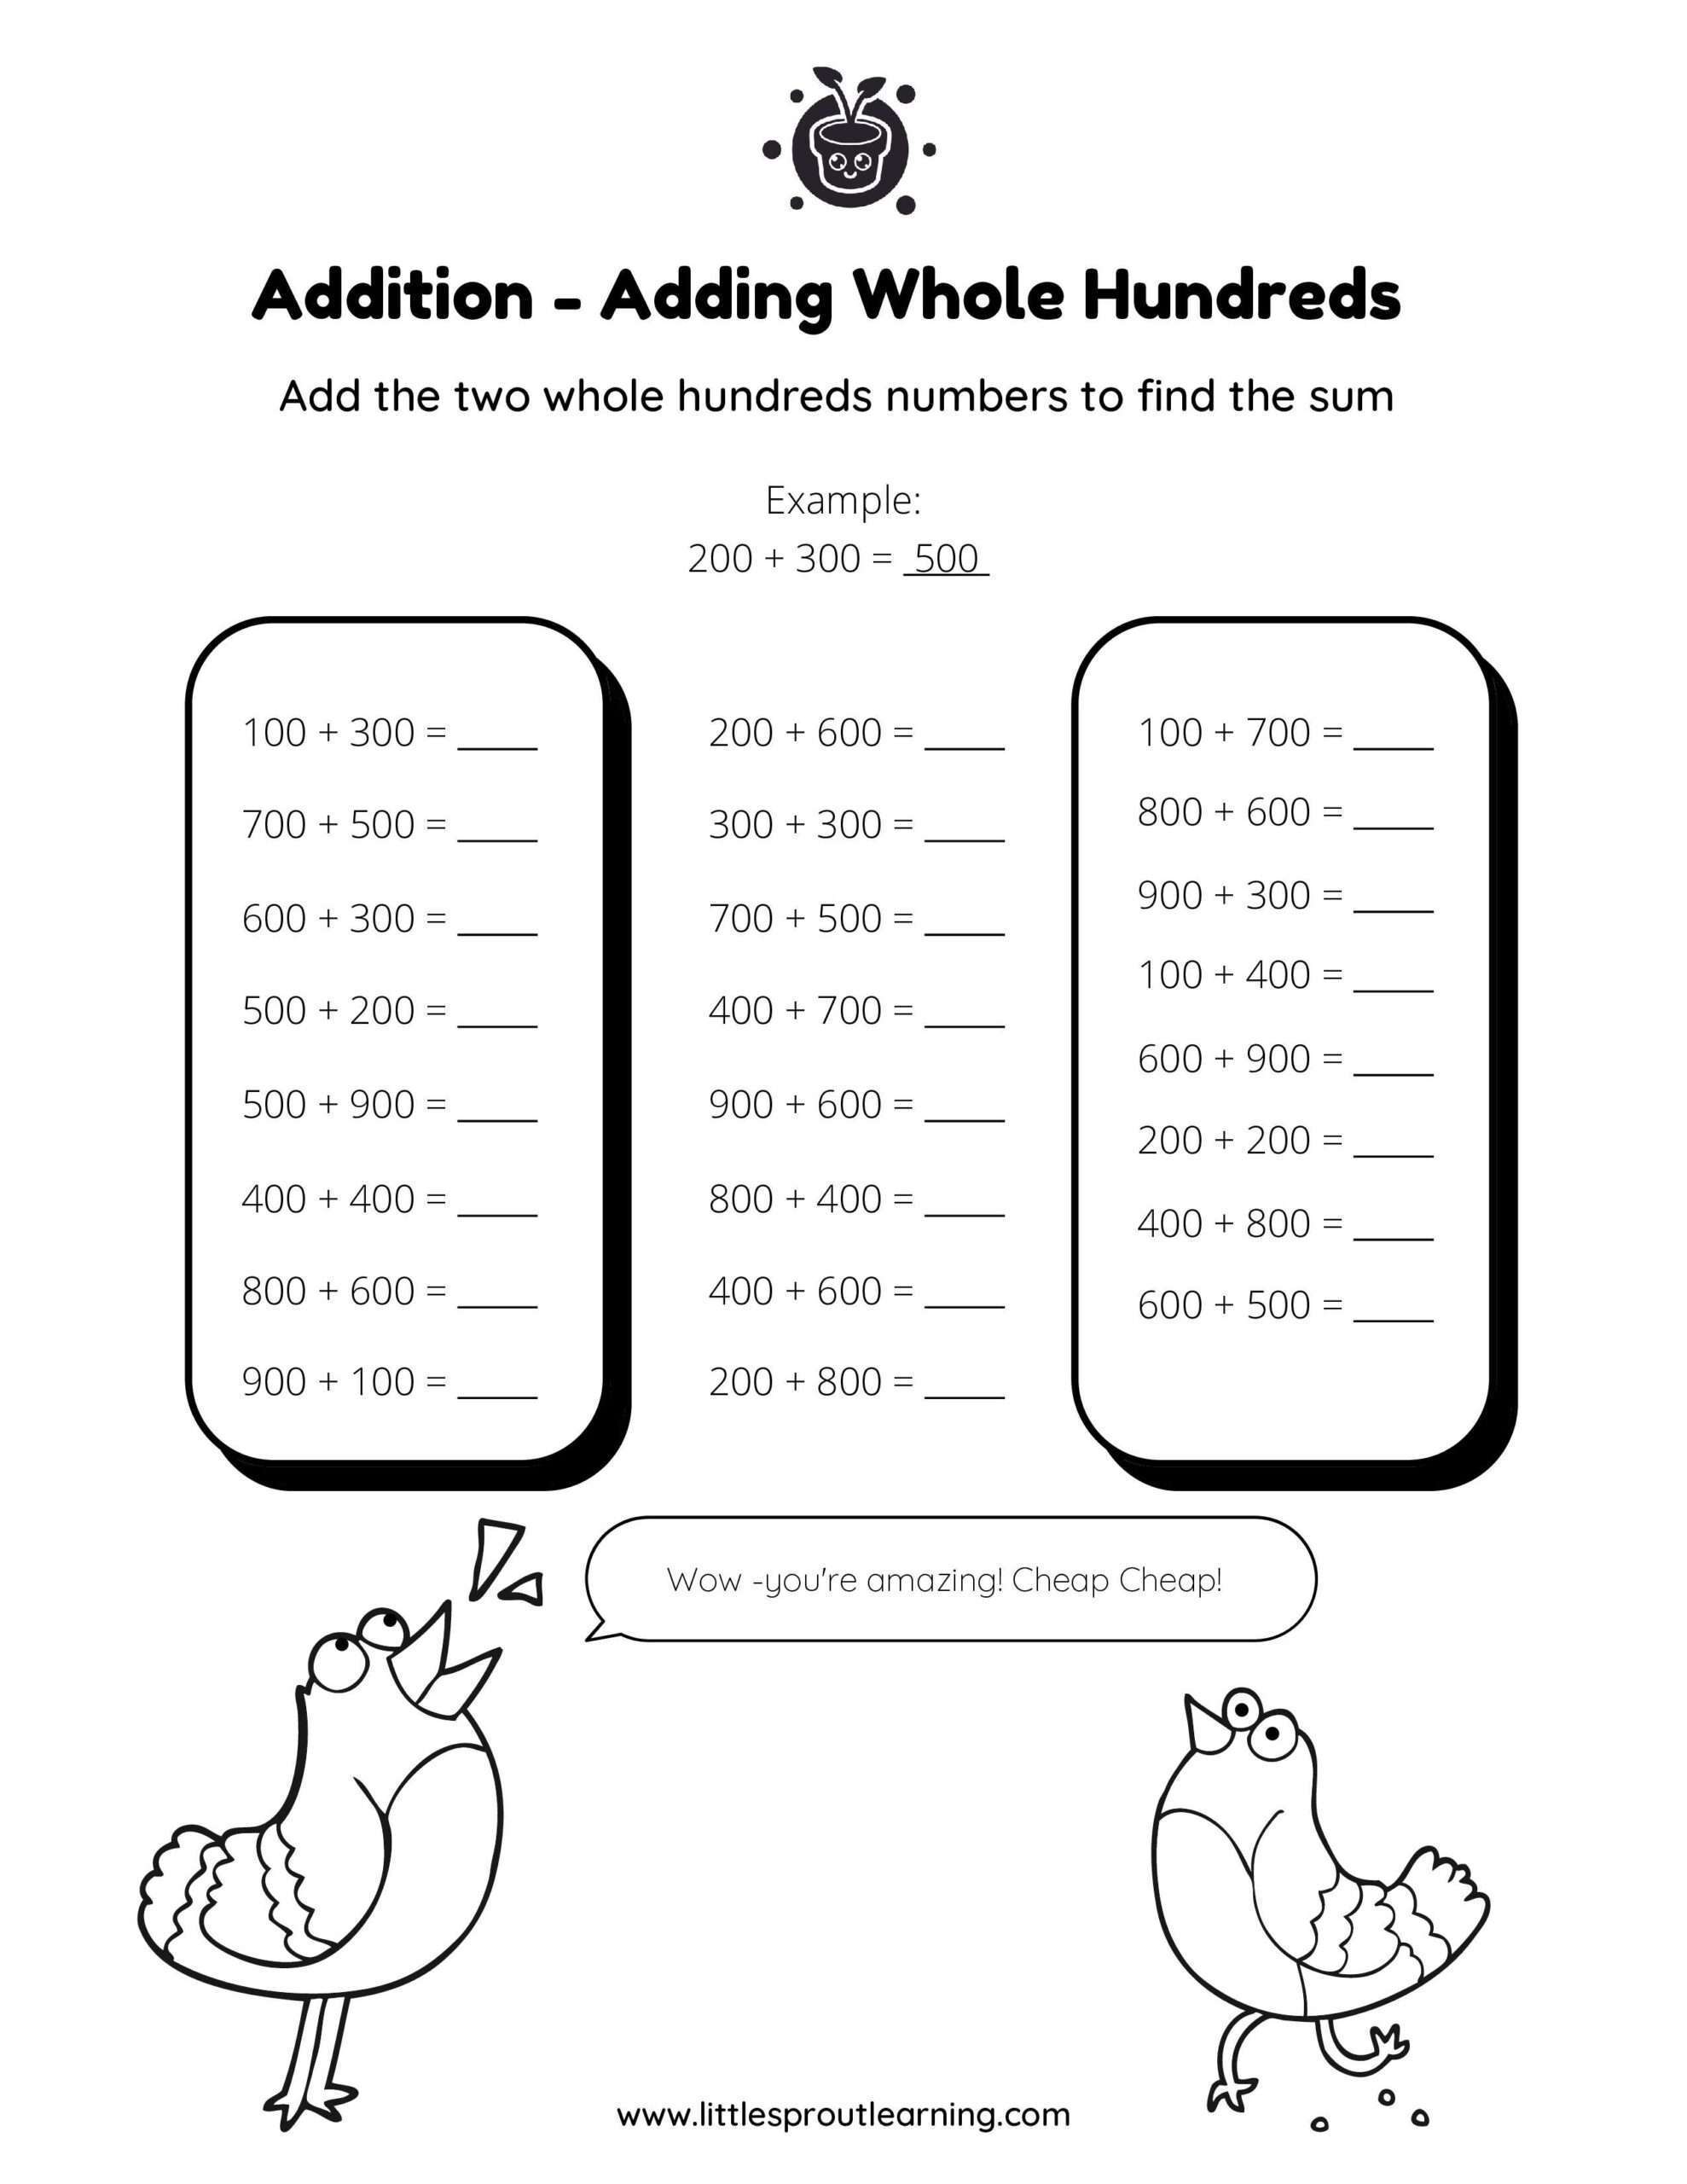 Adding Whole Hundreds With Grade 3 Addition Worksheets